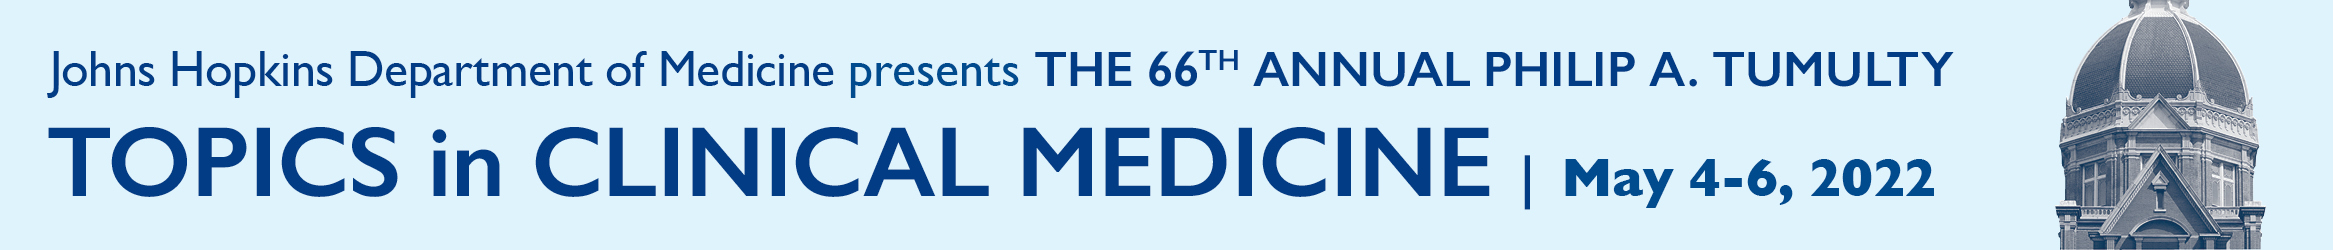 66th Annual Philip A. Tumulty Topics in Clinical Medicine Banner